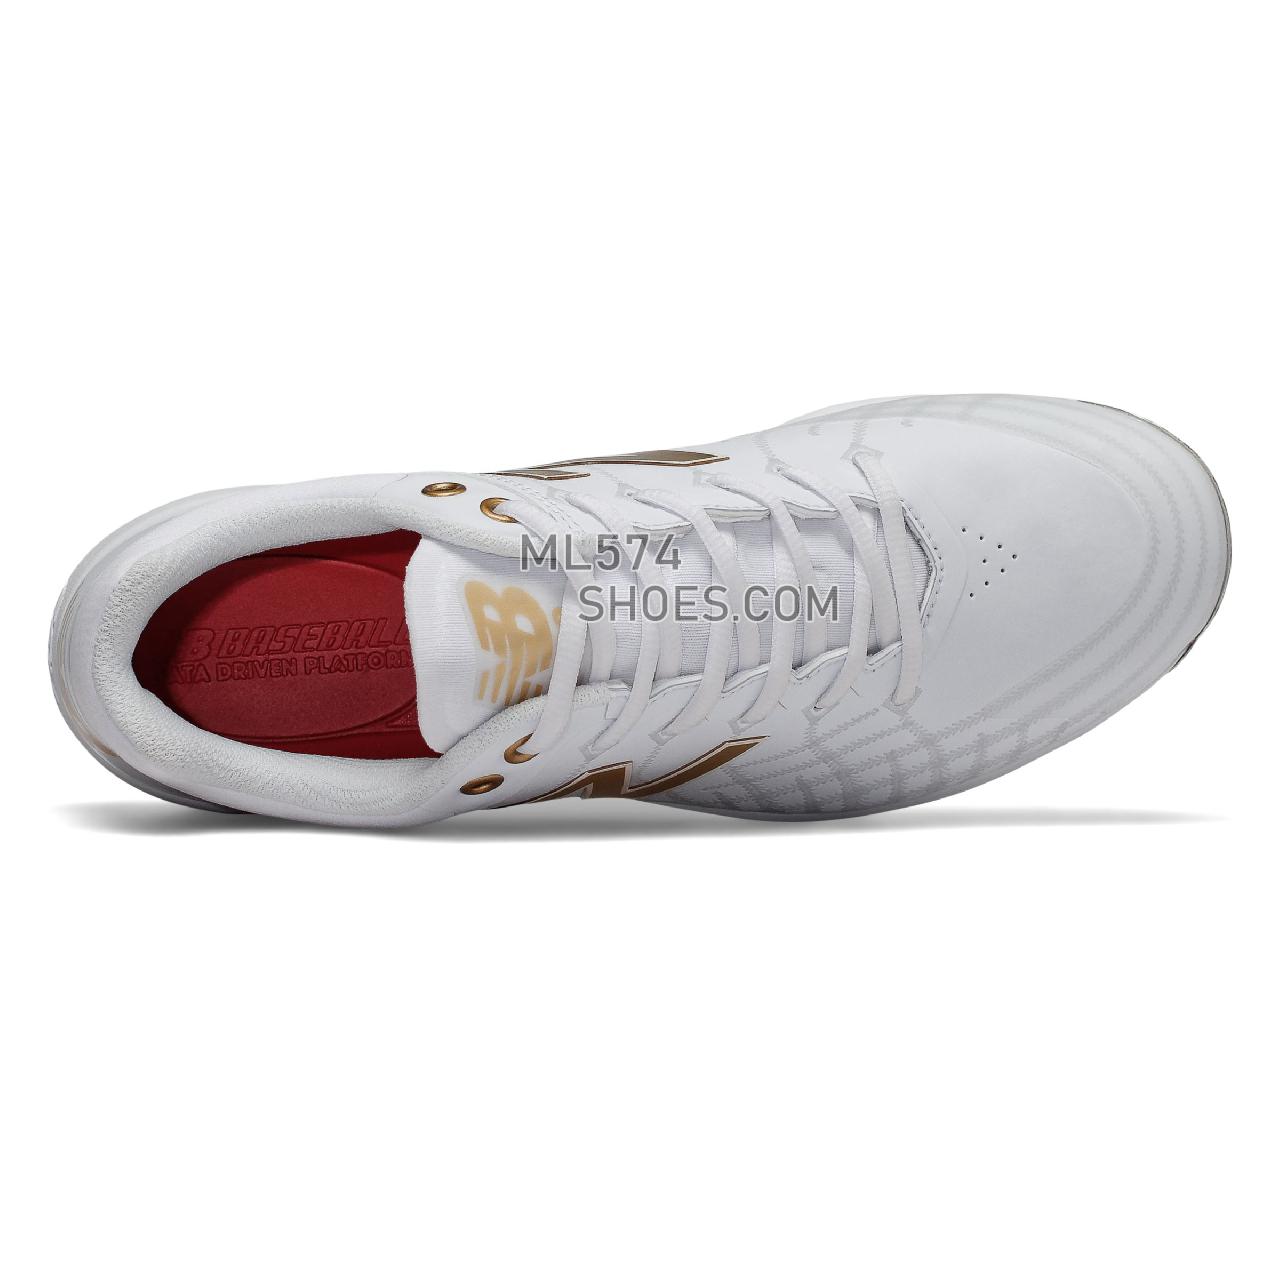 New Balance 4040v5 Hole in the Wall Gang - Men's Baseball Turf - White with Gold - L4040WG5